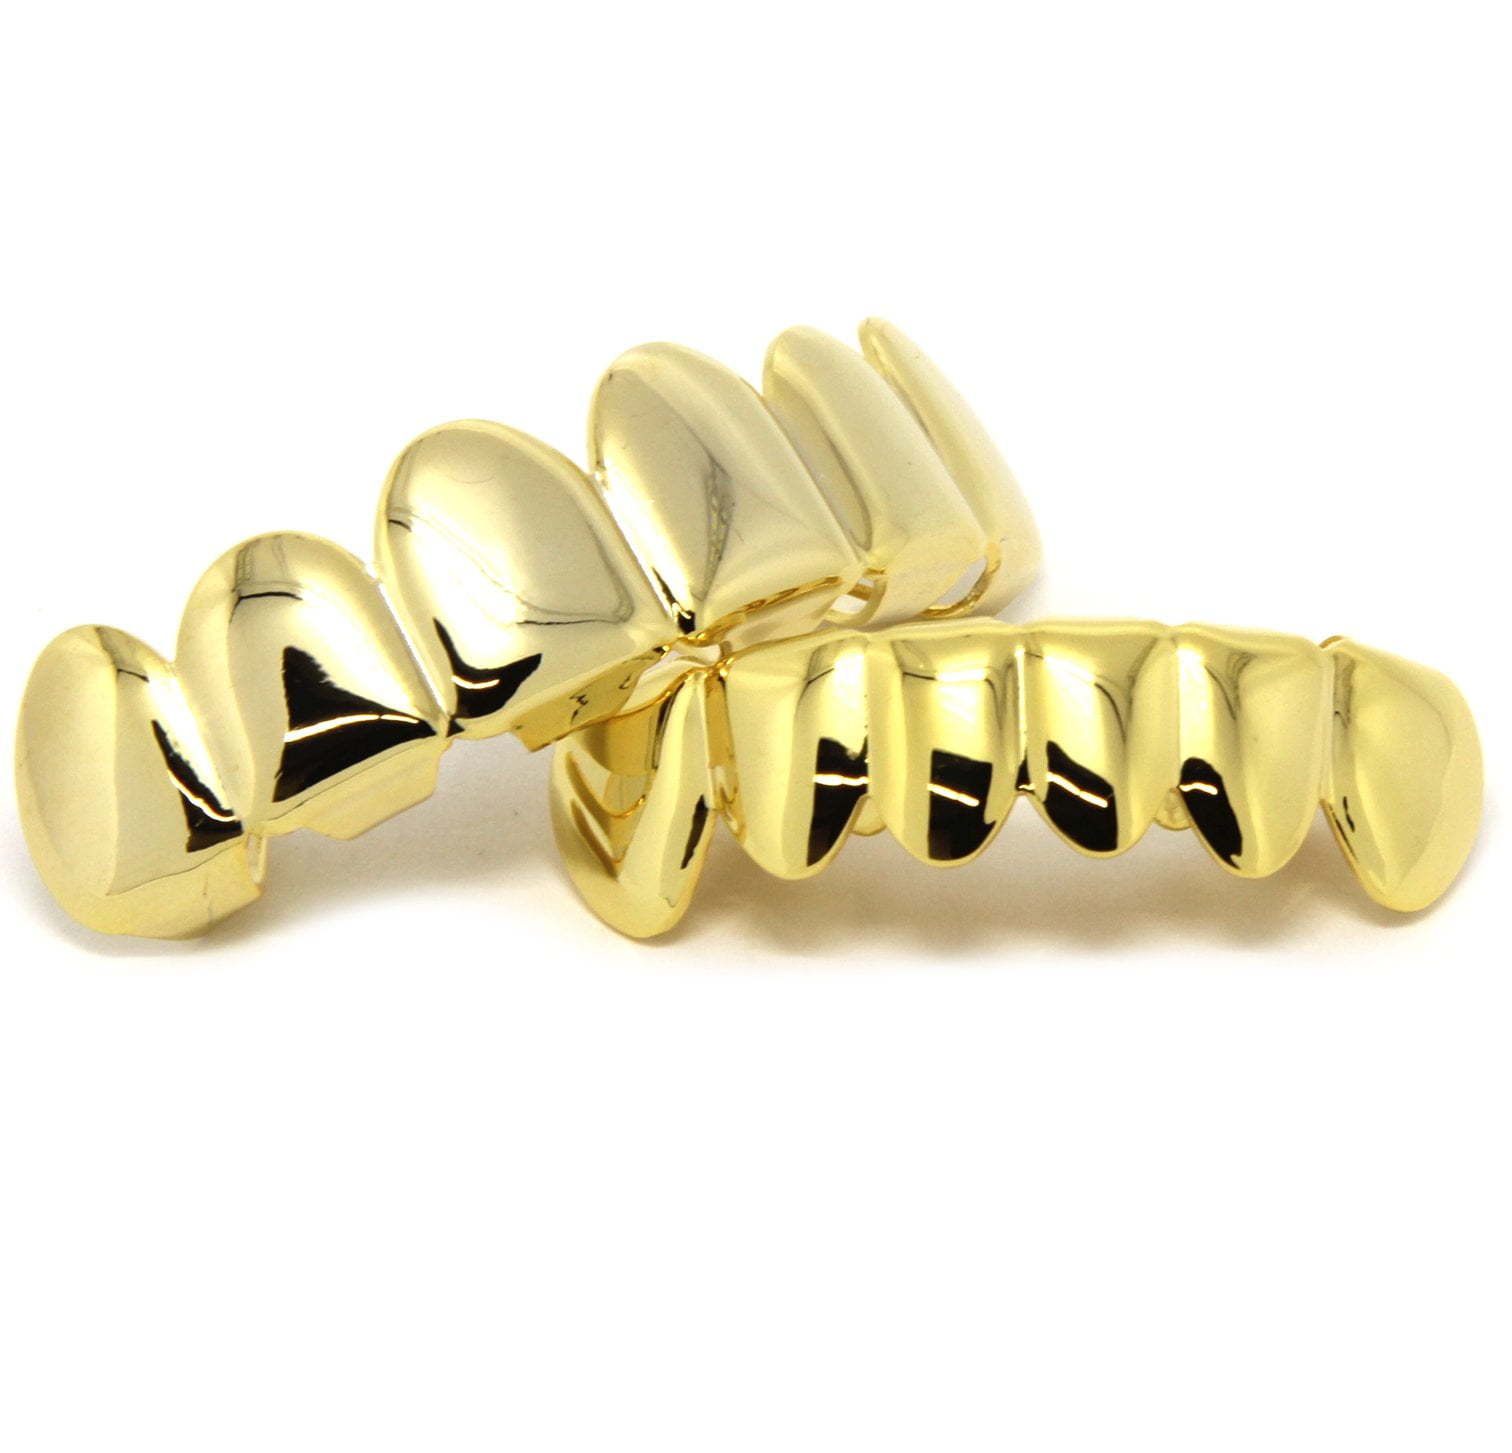 New 14K Gold Plated High Quality Big CZ Top & Bottom GRILLZ Mouth Teeth 